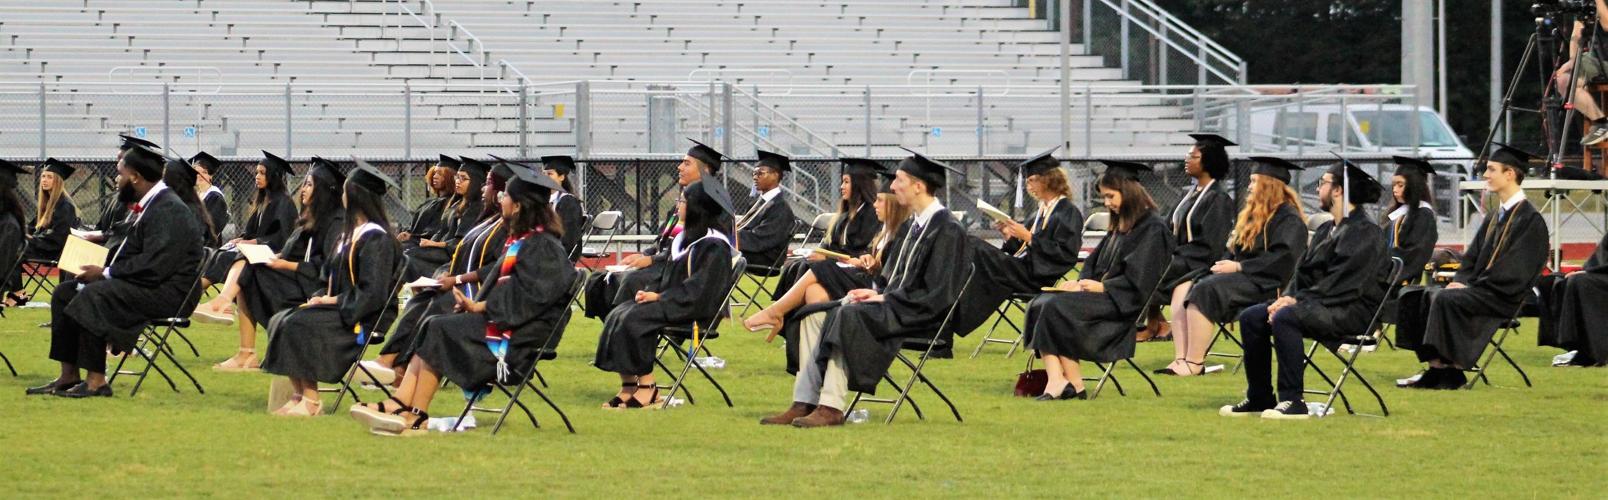 Union County Early College holds 2021 graduation ceremony